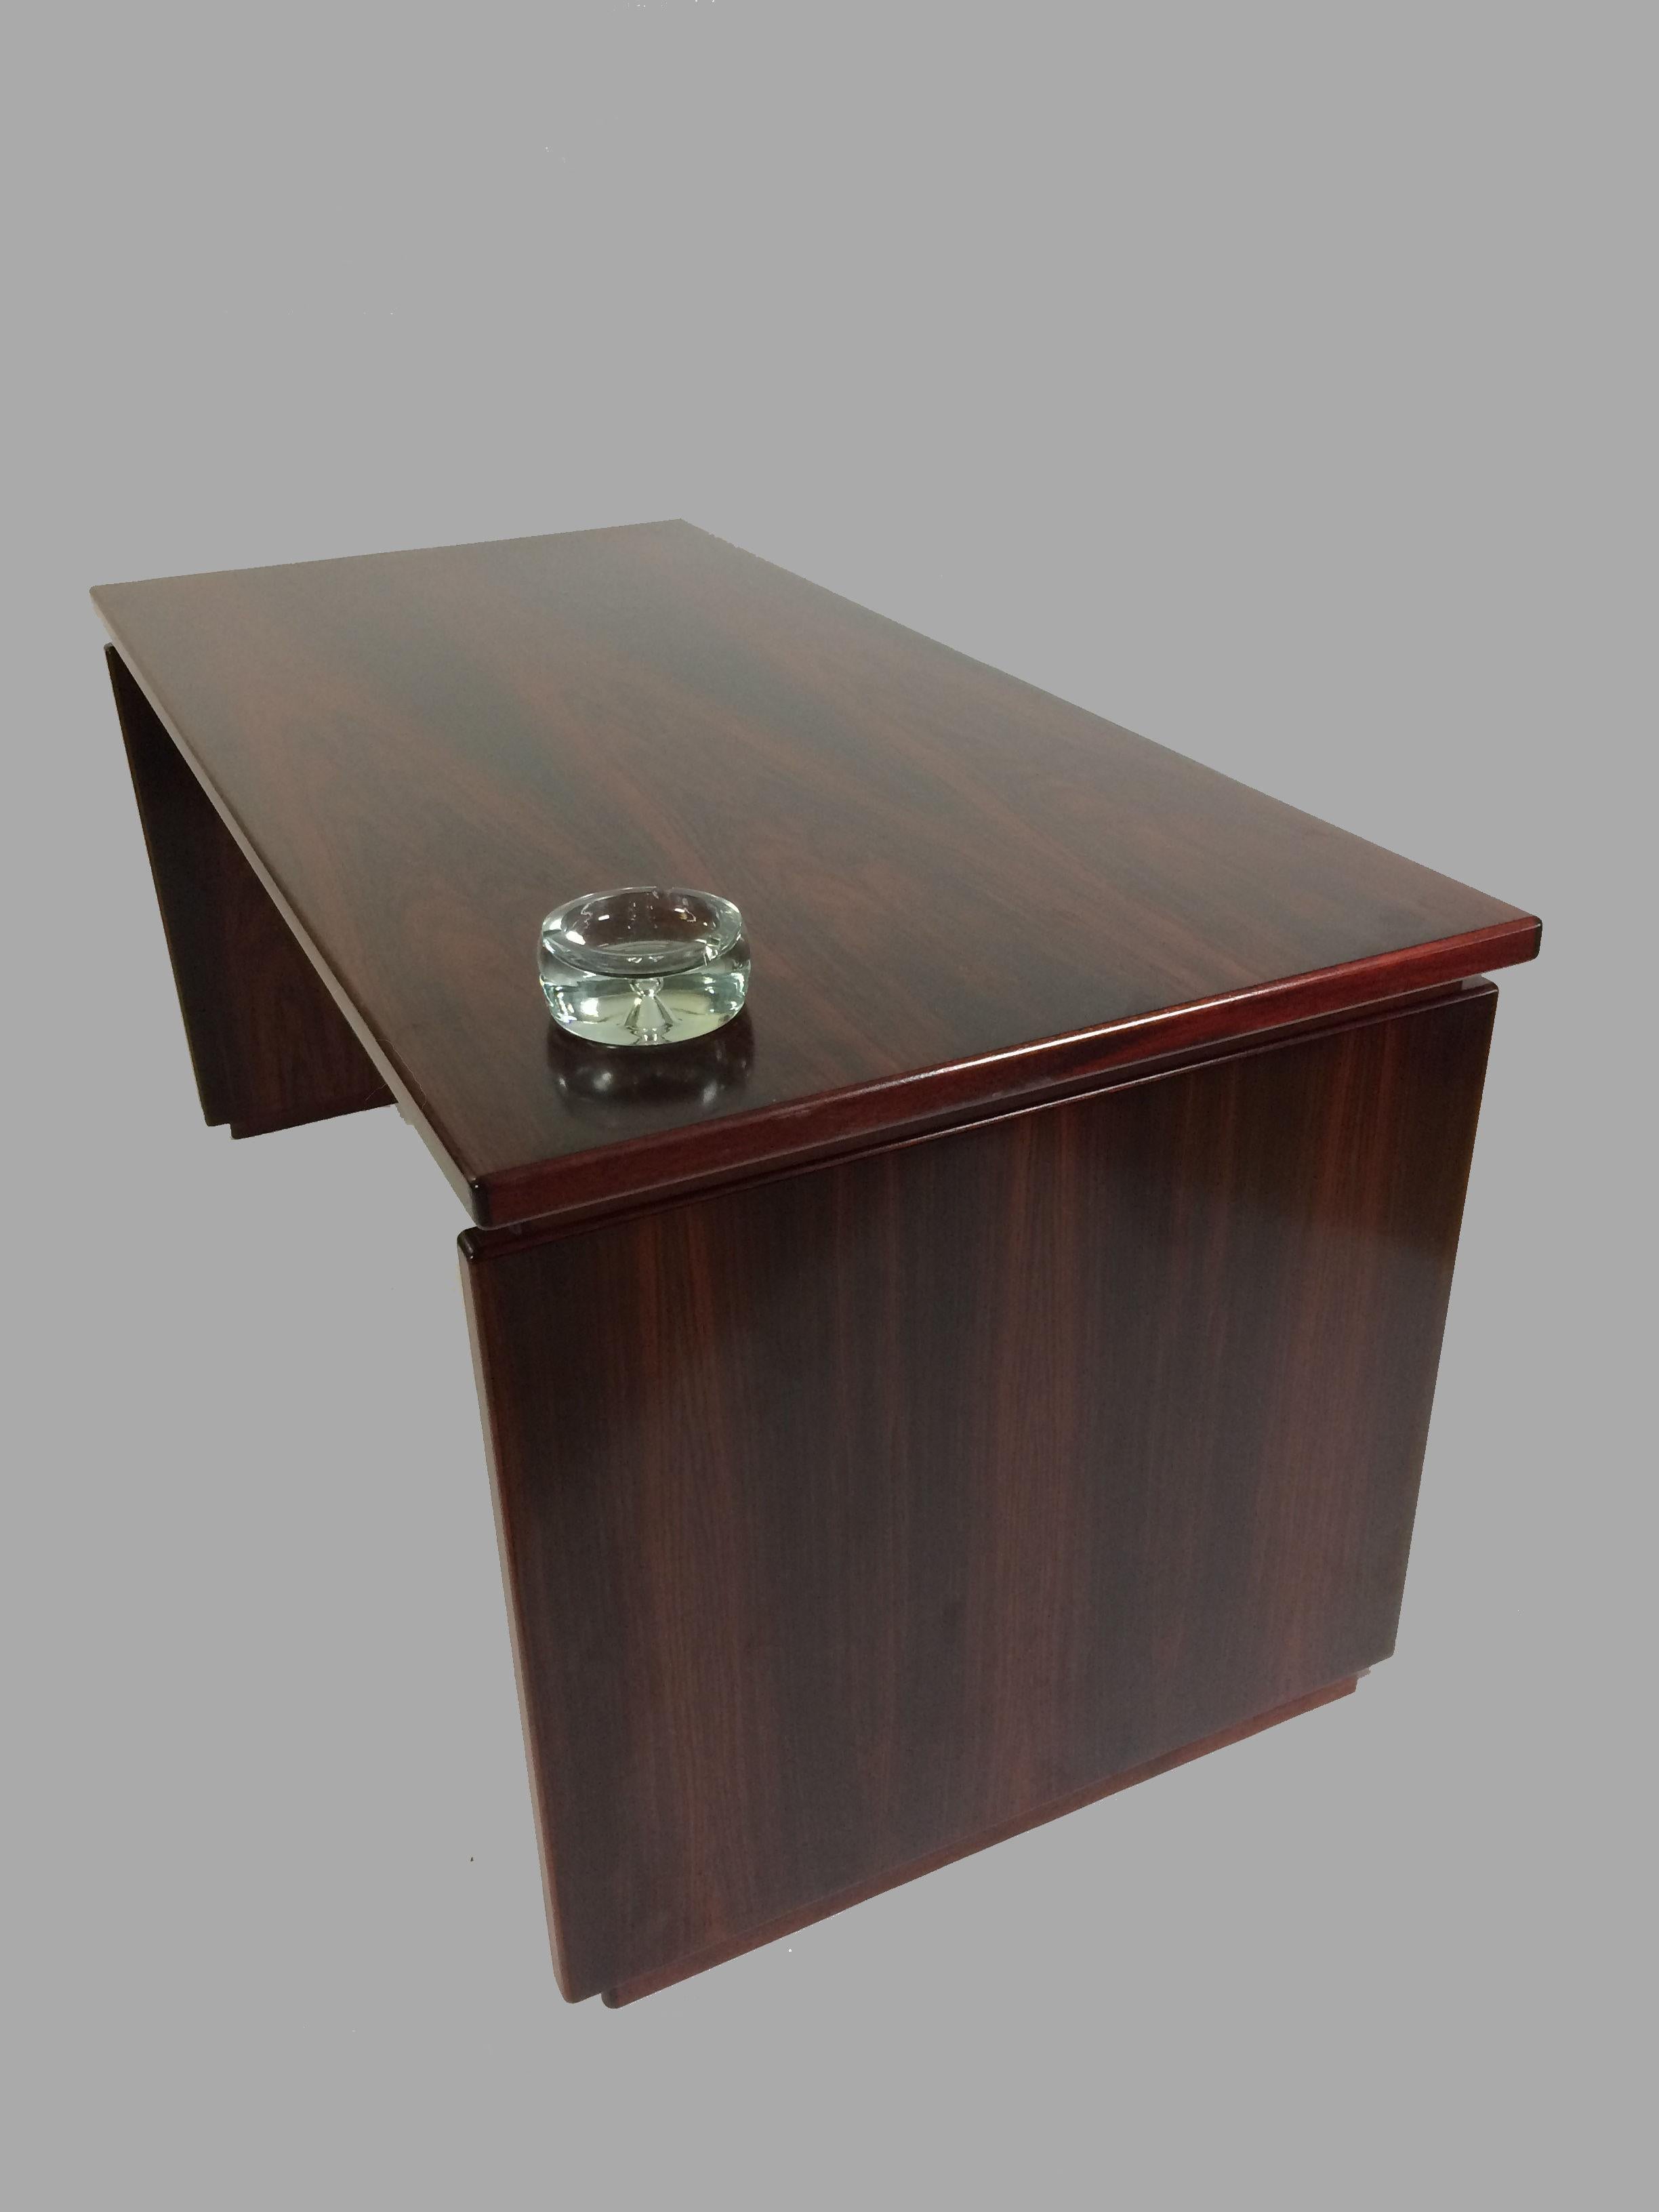 Scandinavian Modern 1990s Excecutive Desk in Rosewood by Bent Silberg for Bent Silberg Mobler